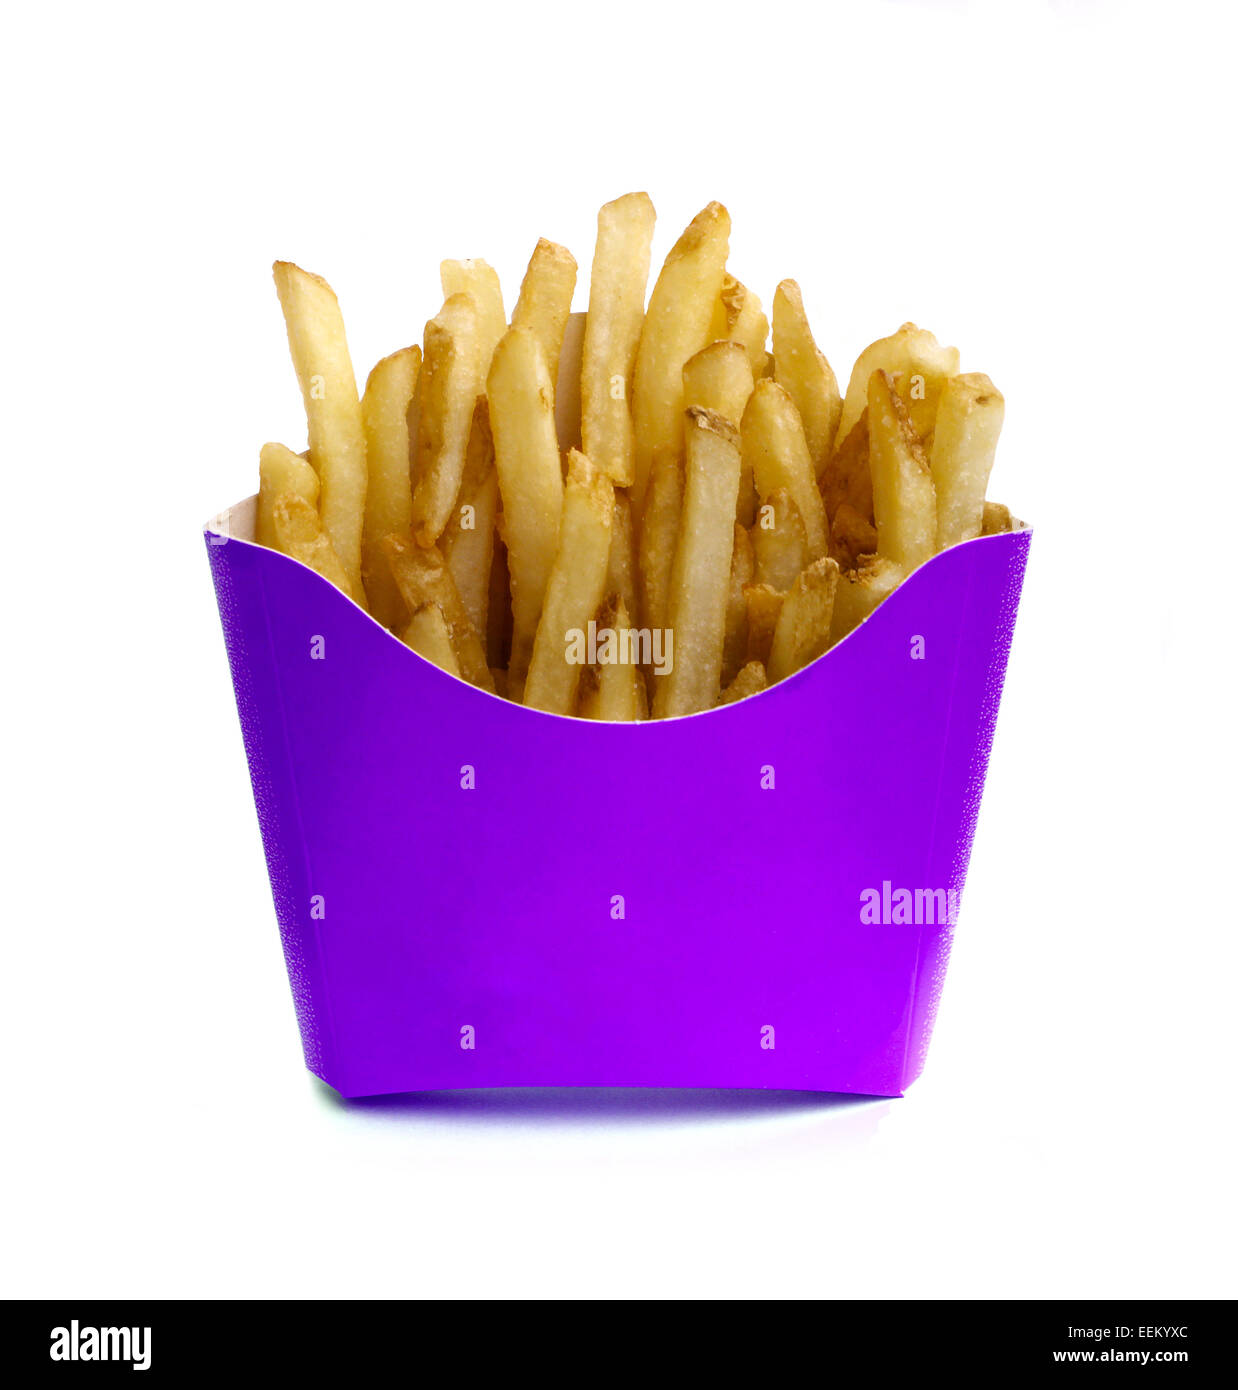  Focalmotors 20PCS Disposable Fast Food Fries Packing Box/French  Fry Box Takeaway Packaging Box, M : Industrial & Scientific